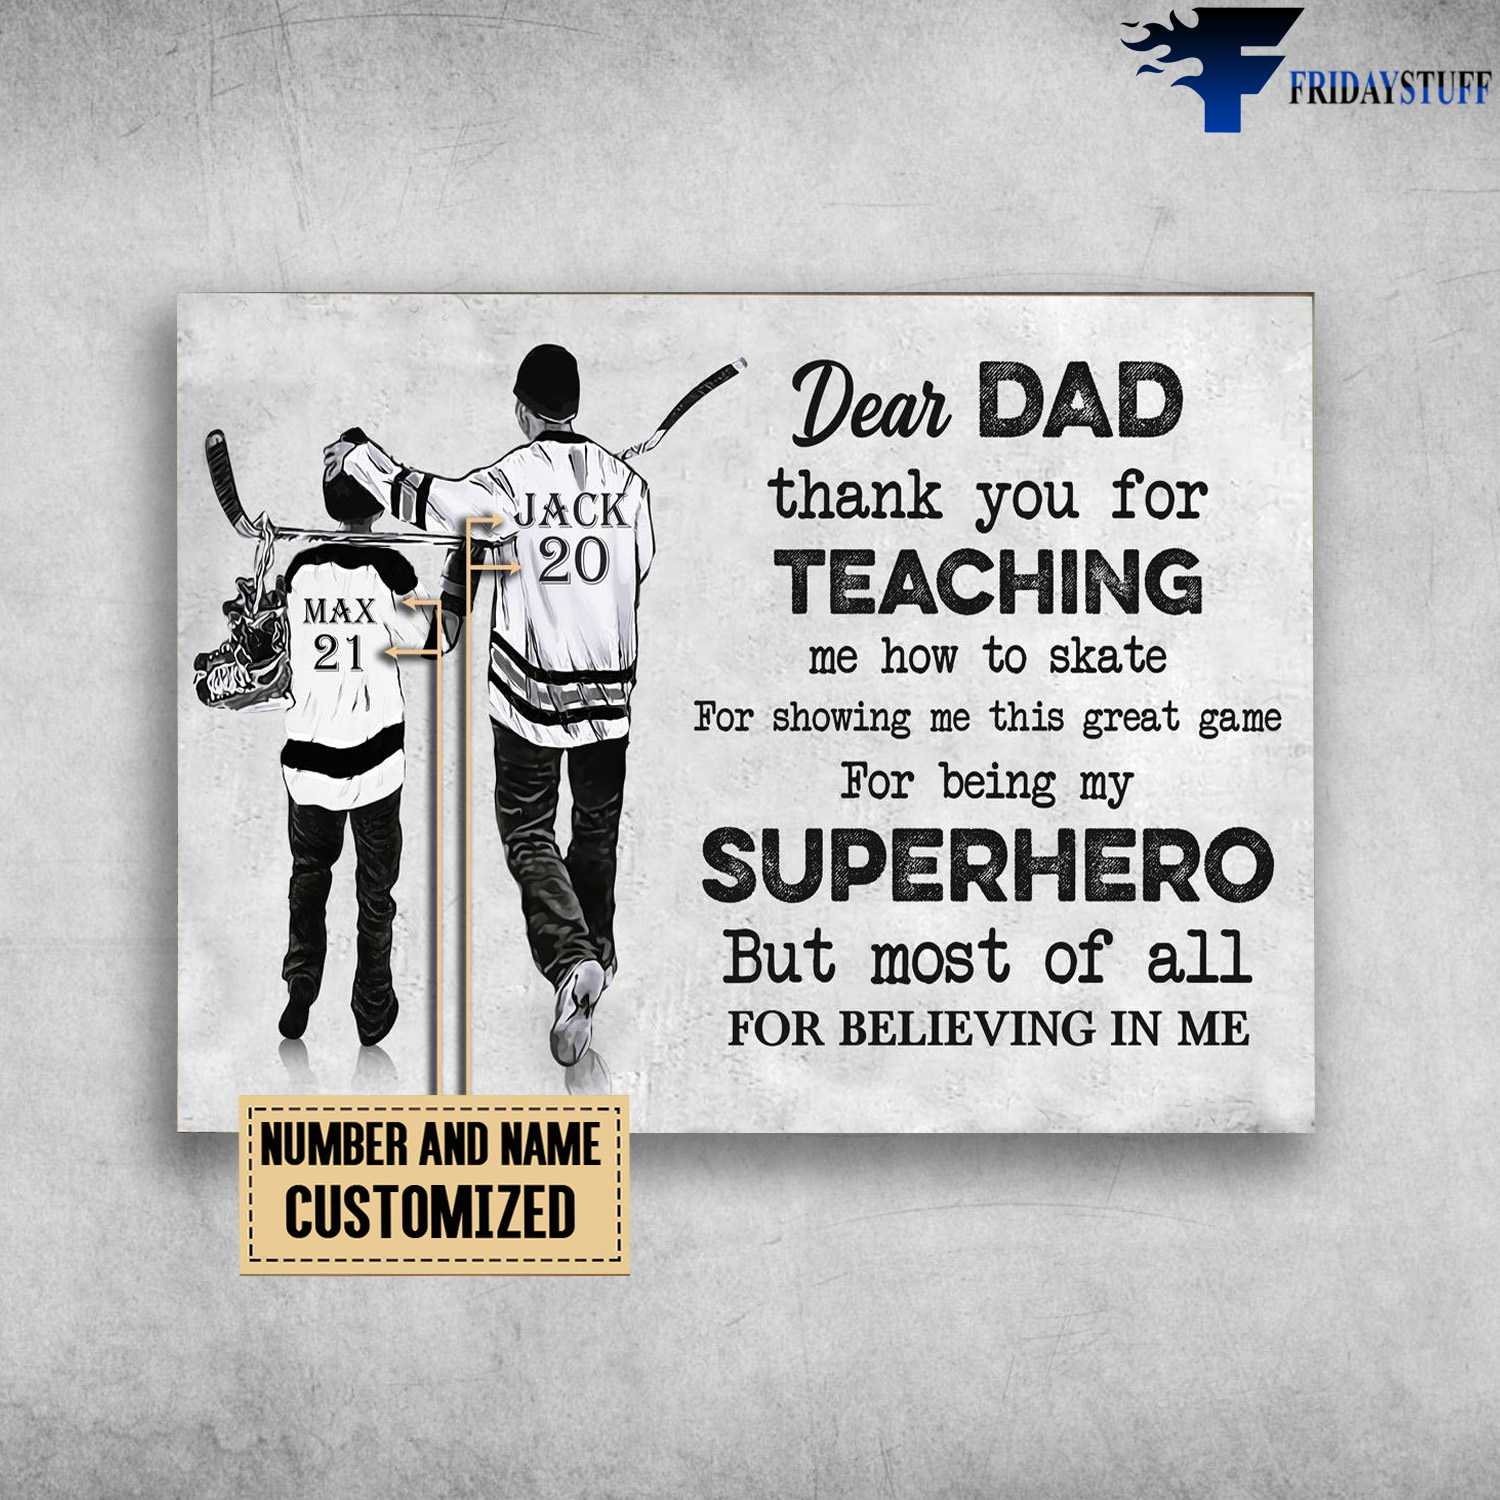 Hockey Dad And Son, Dear Dad, Thank You For Teaching Me How To Skate, For Showing Me This Great Game, For Being My Superhero, But Most Of All, For Believing In Me